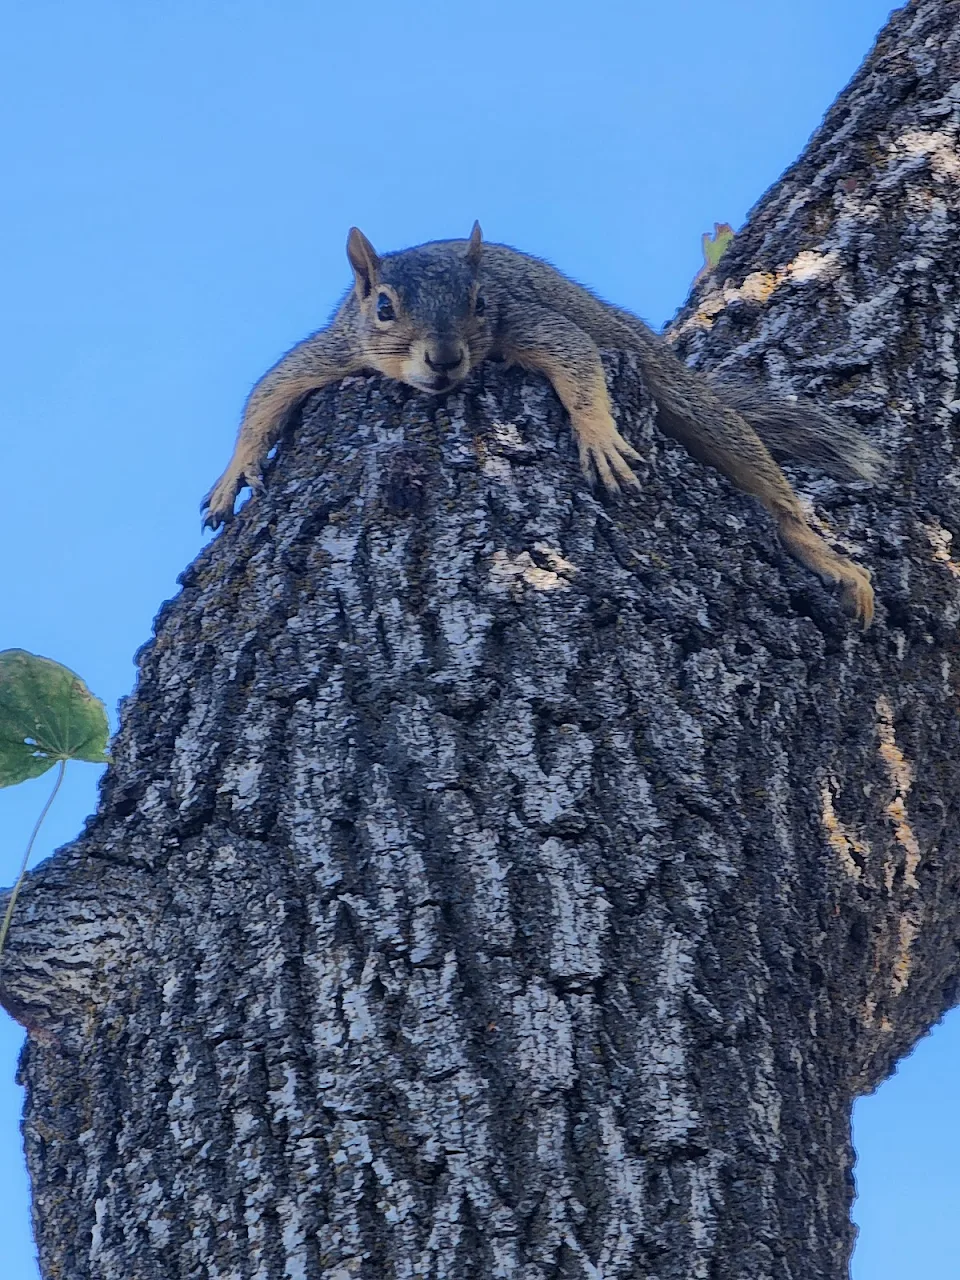 Oh to be a lazy squirrel